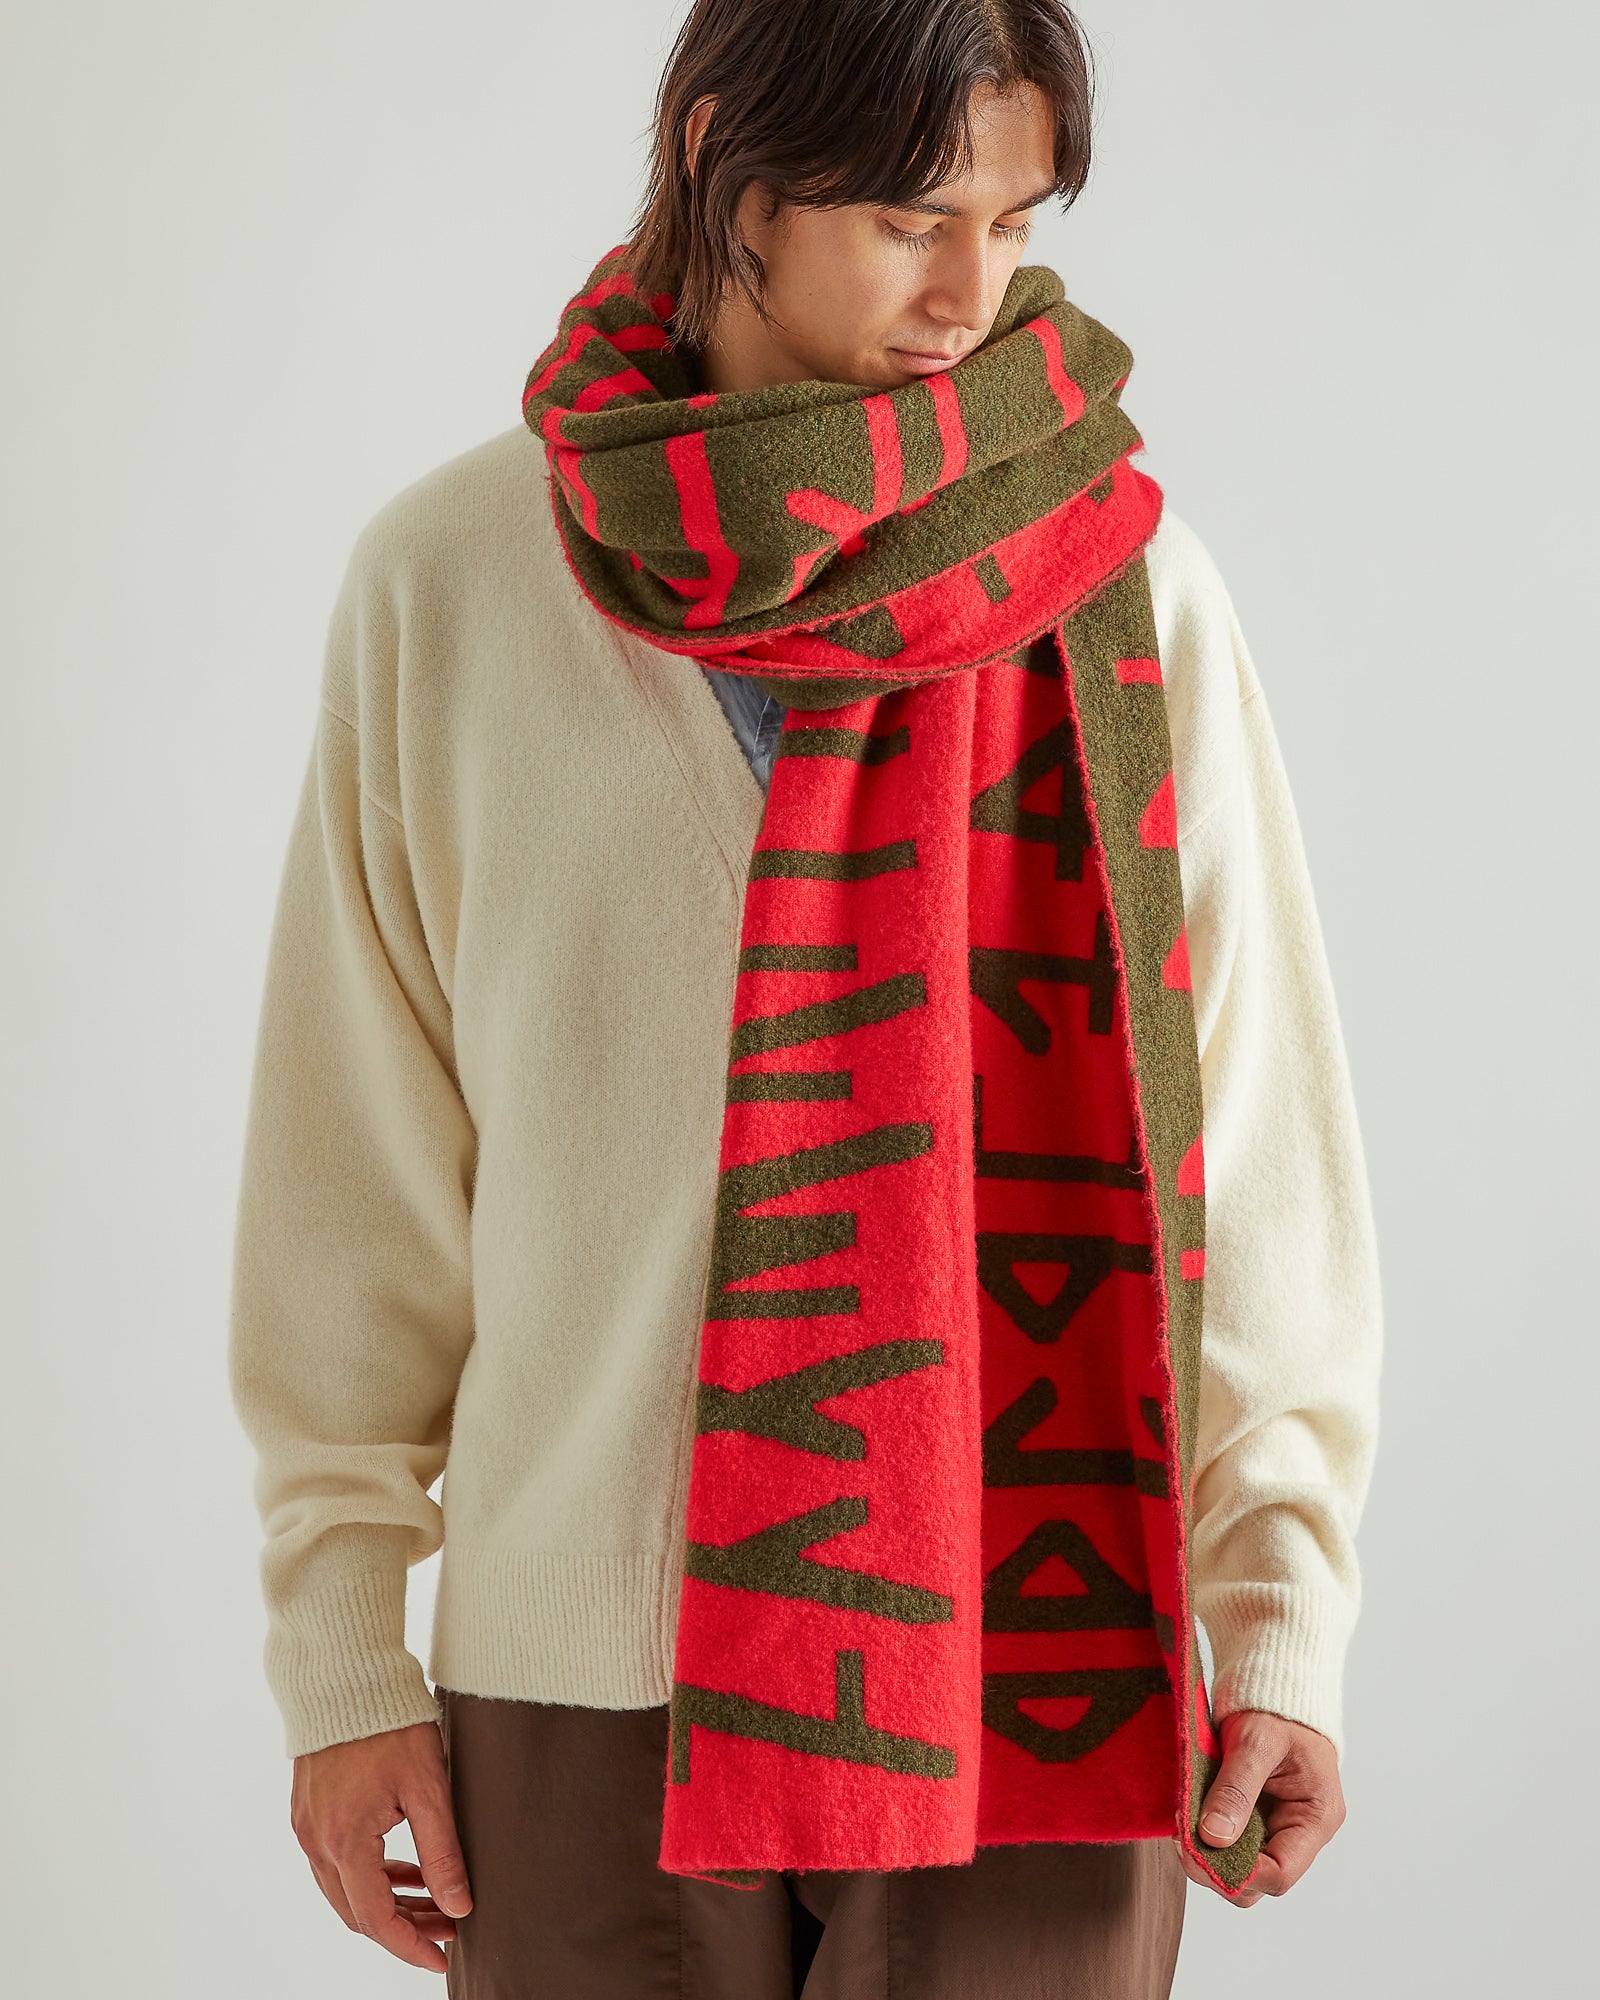 Scroll Scarf in Dragonfruit Red/Green